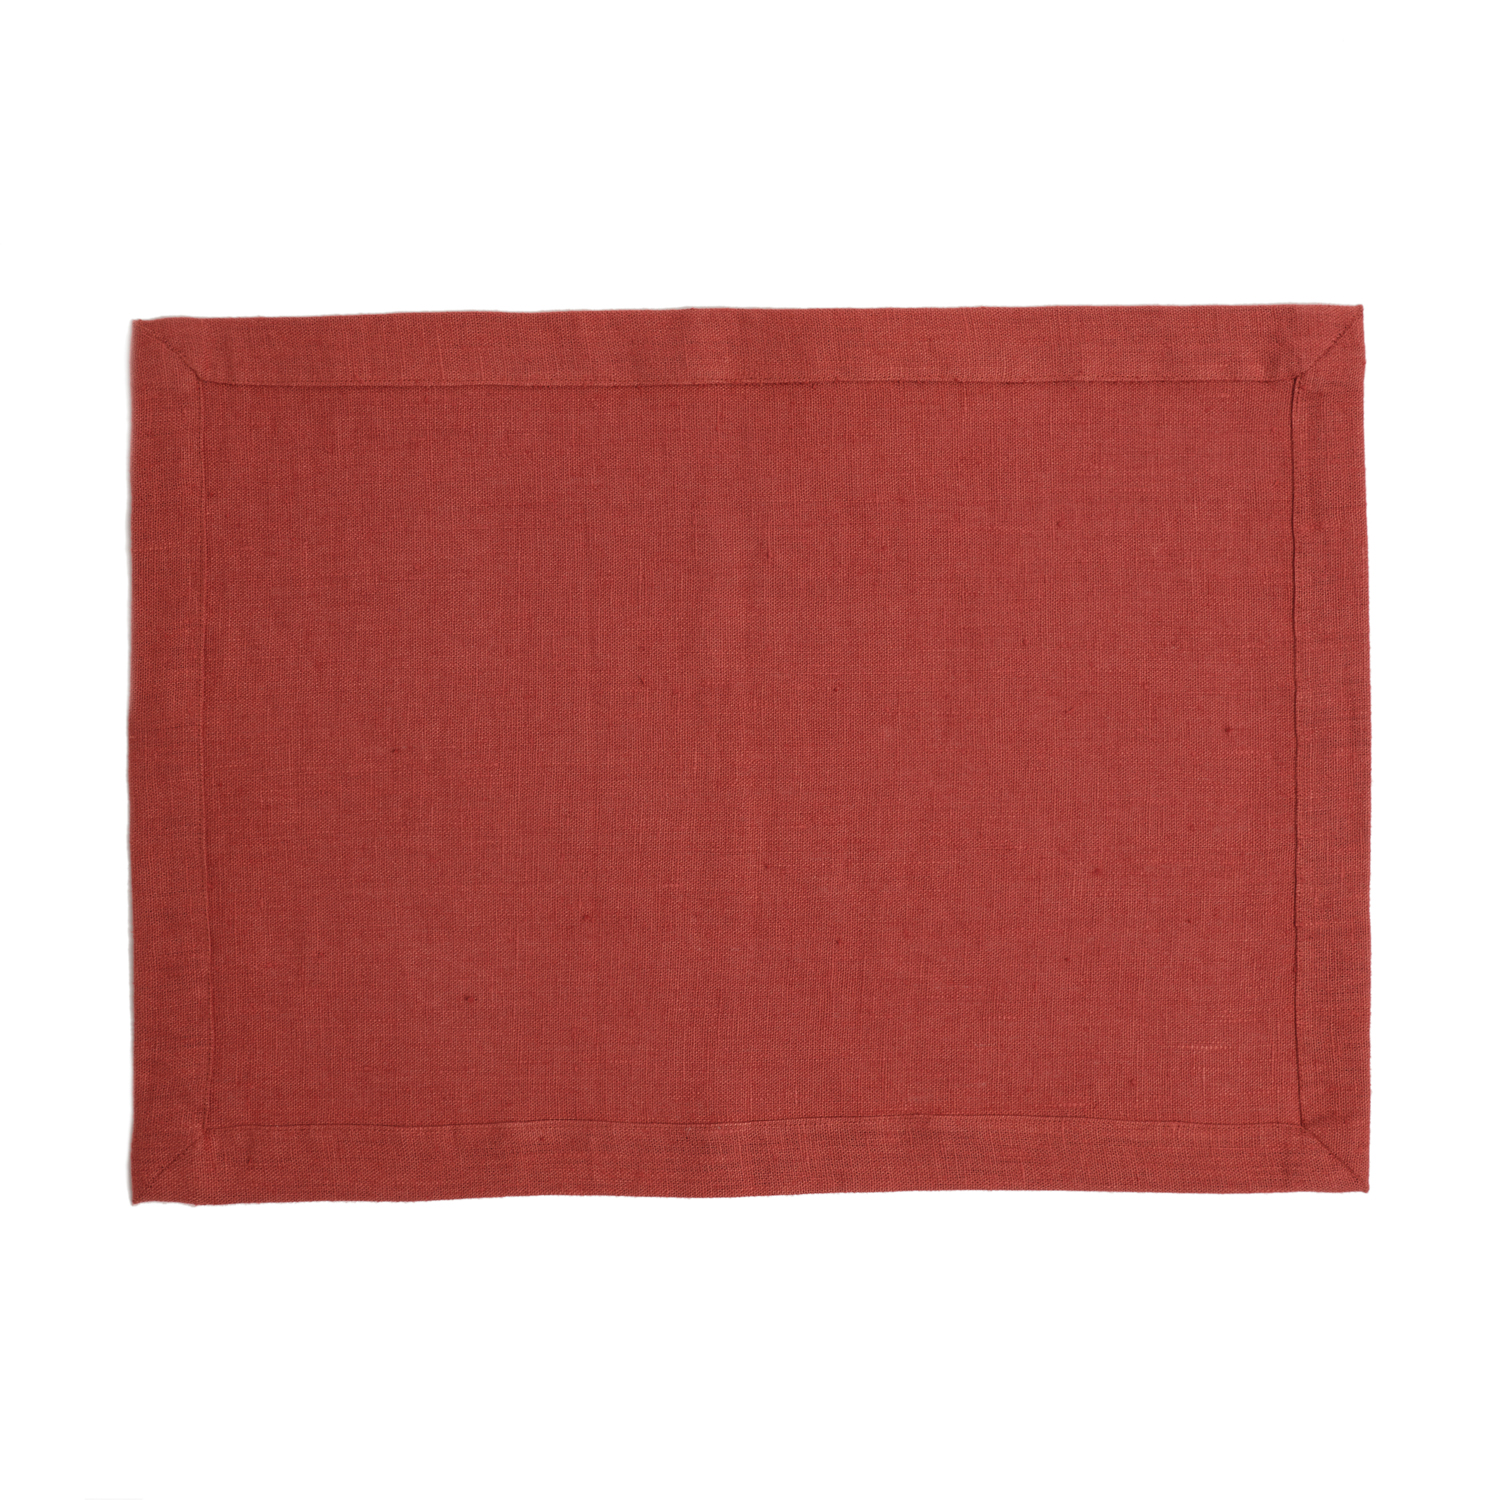 French Linen Placemat, Rust